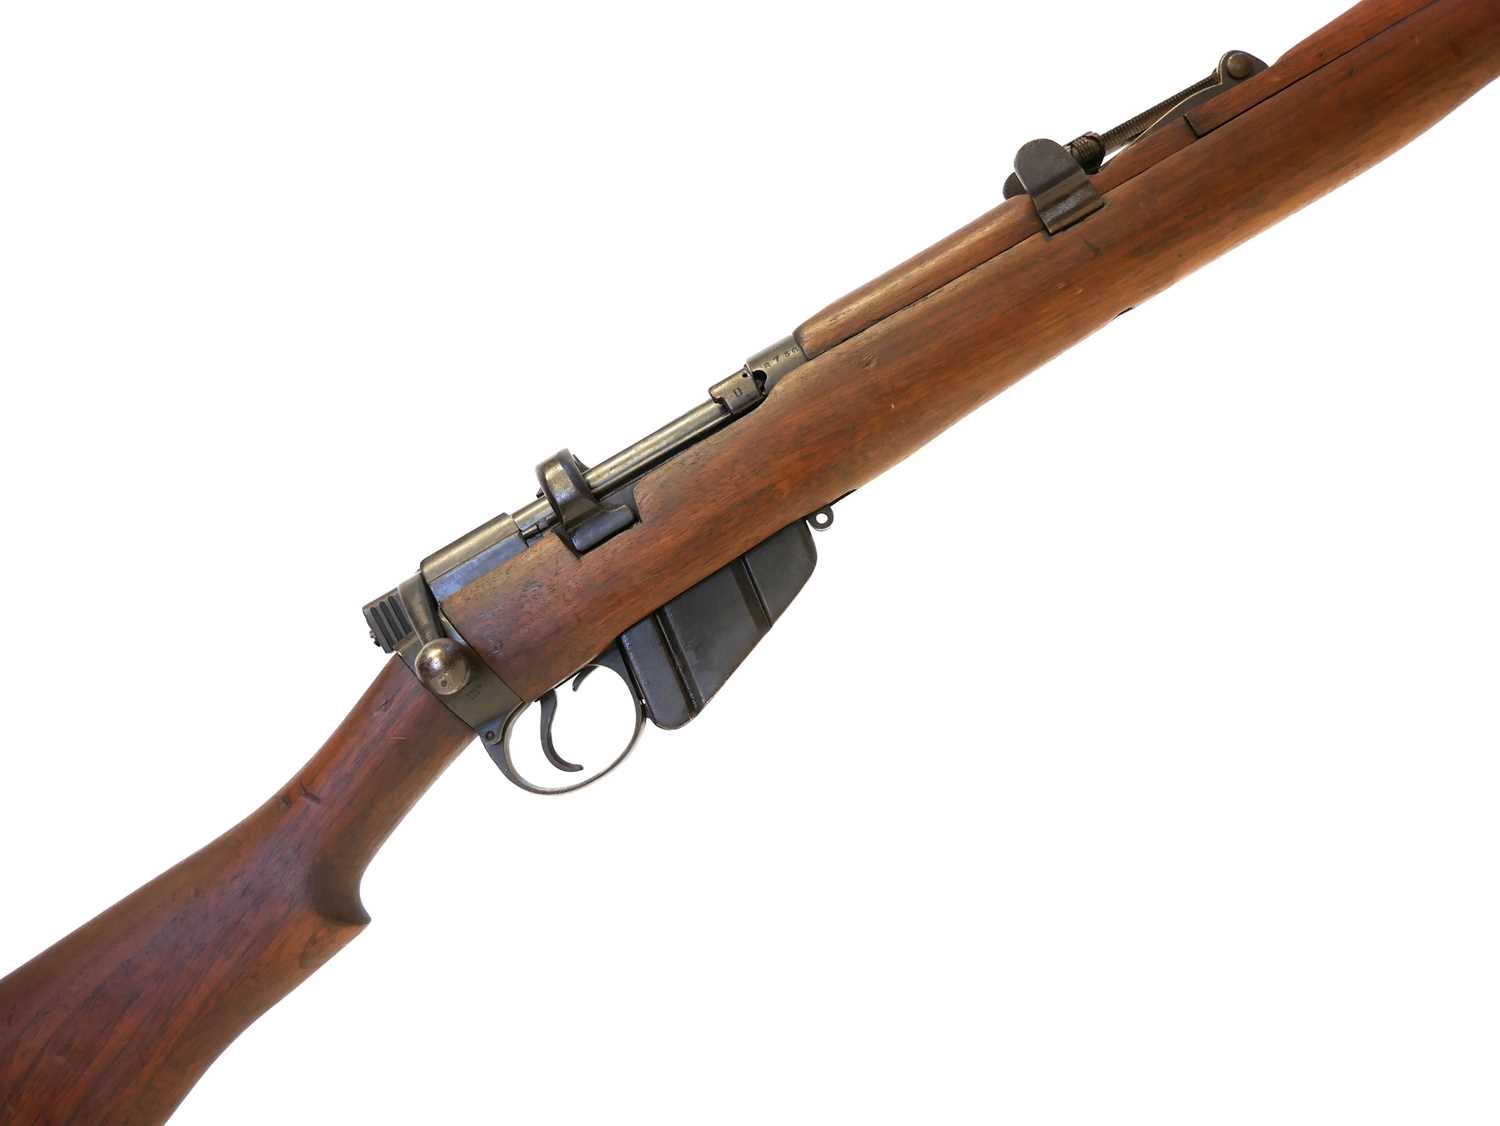 Lot 172 - Enfield .303 SMLE bolt action rifle LICENCE REQUIRED